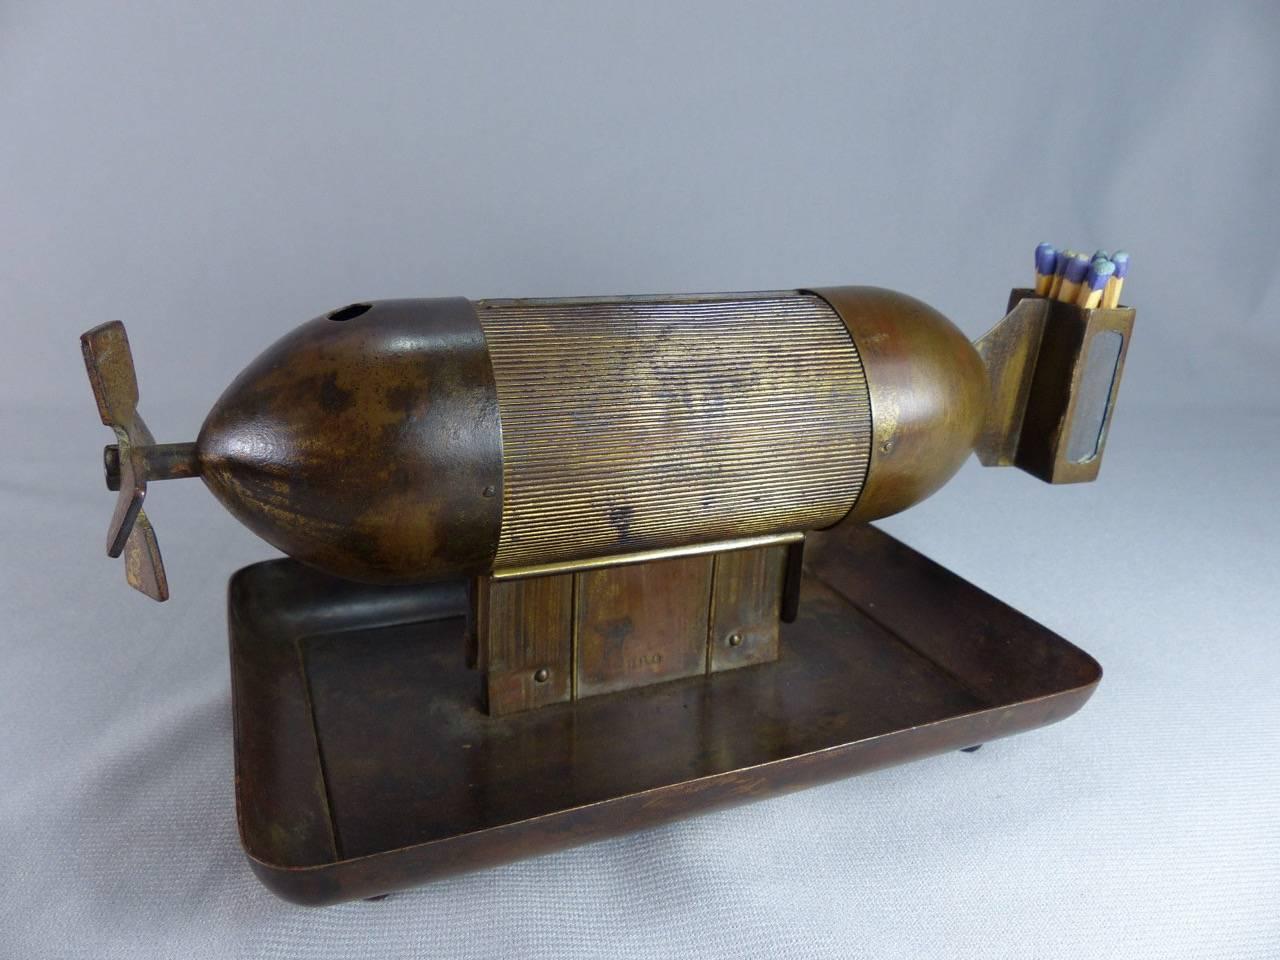 Rare and unusual German zeppelin torpedo bomb cigarette dispenser cigar cutter. Predates the highly collectible and most famous zeppelin and airplane cocktail shakers manufactured in the 1930's by the German company with the letters DGR, which also